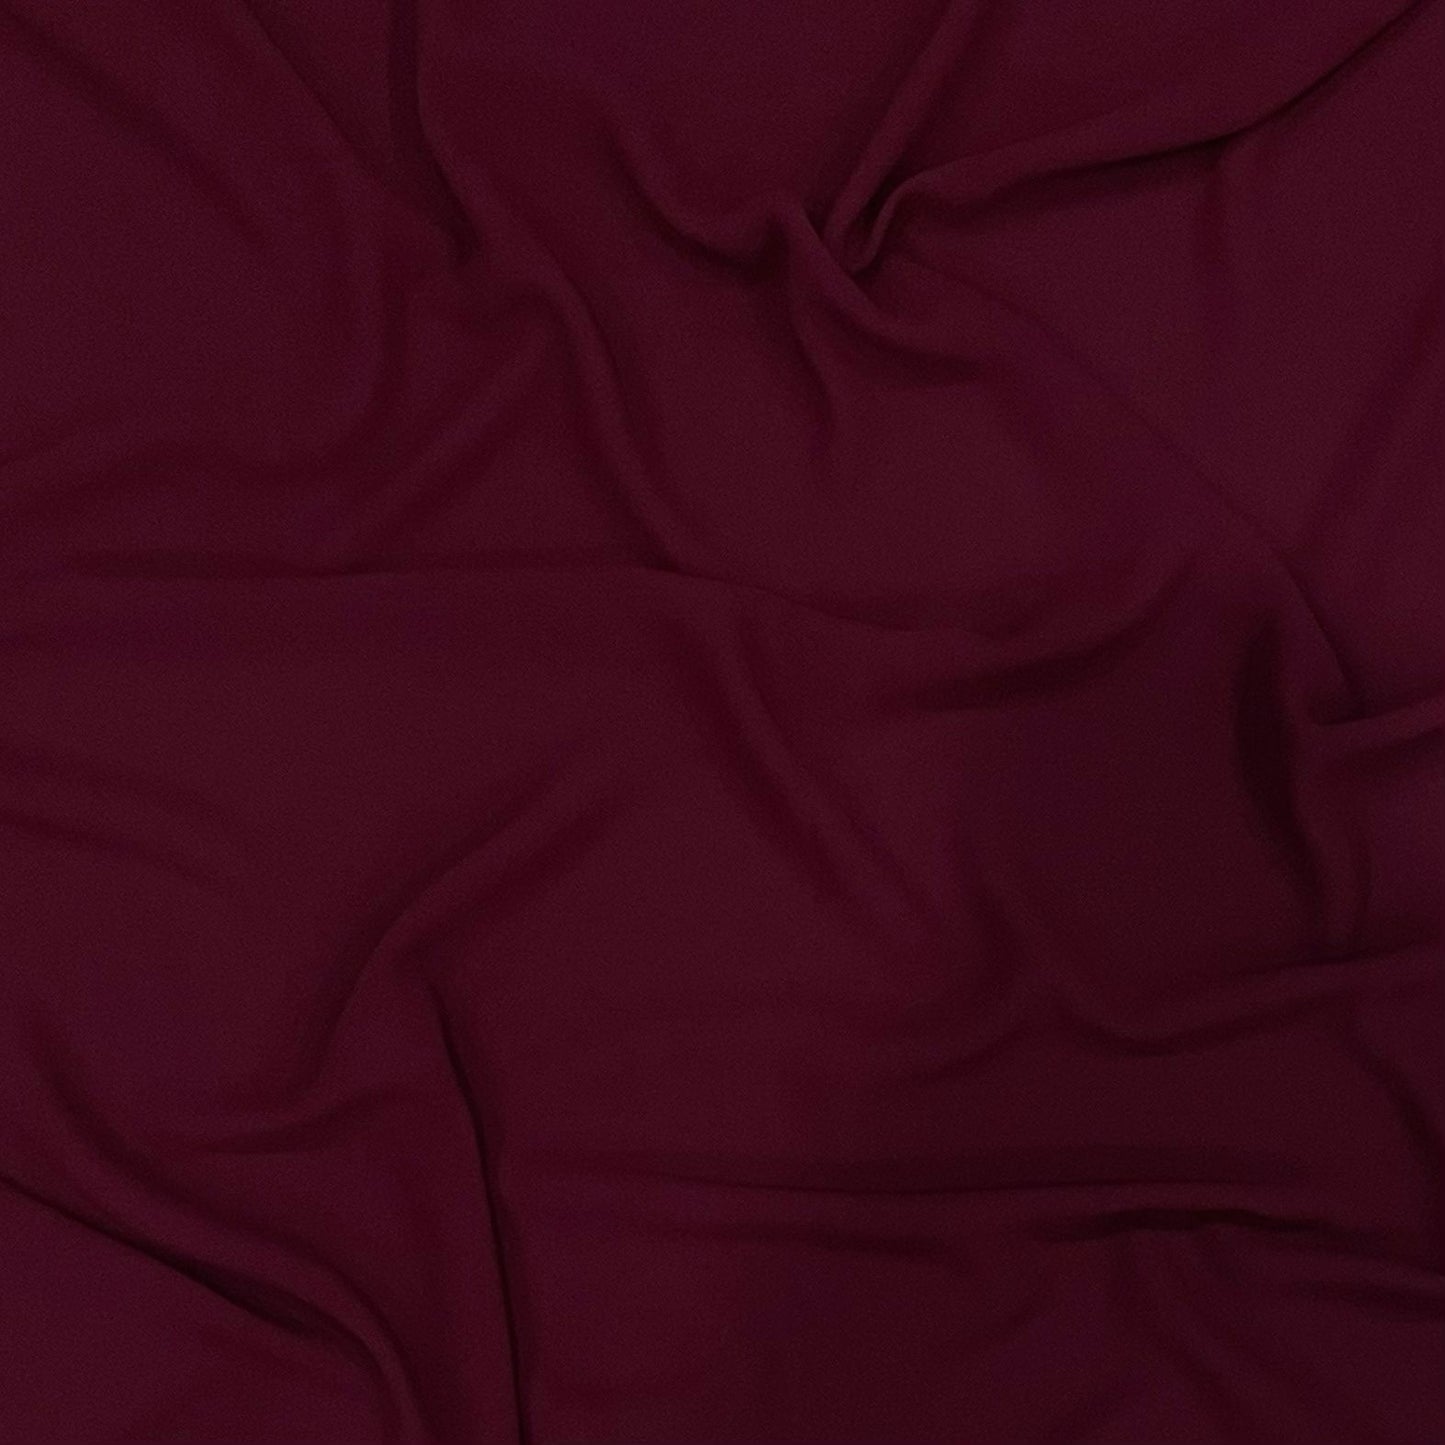 Burgundy Chiffon Hijab  https://www.arifasboutique.com/products/burgundy-chiffon-hijab  Our chiffon hijabs are lightweight and airy allowing for a versatile look from casual to formal. A closet staple made from a comfortable textured chiffon material. We have handpicked each of our colours providing you with a wide range to choose from. Size 180 cm x 70 cm Color may look different due to different screen …